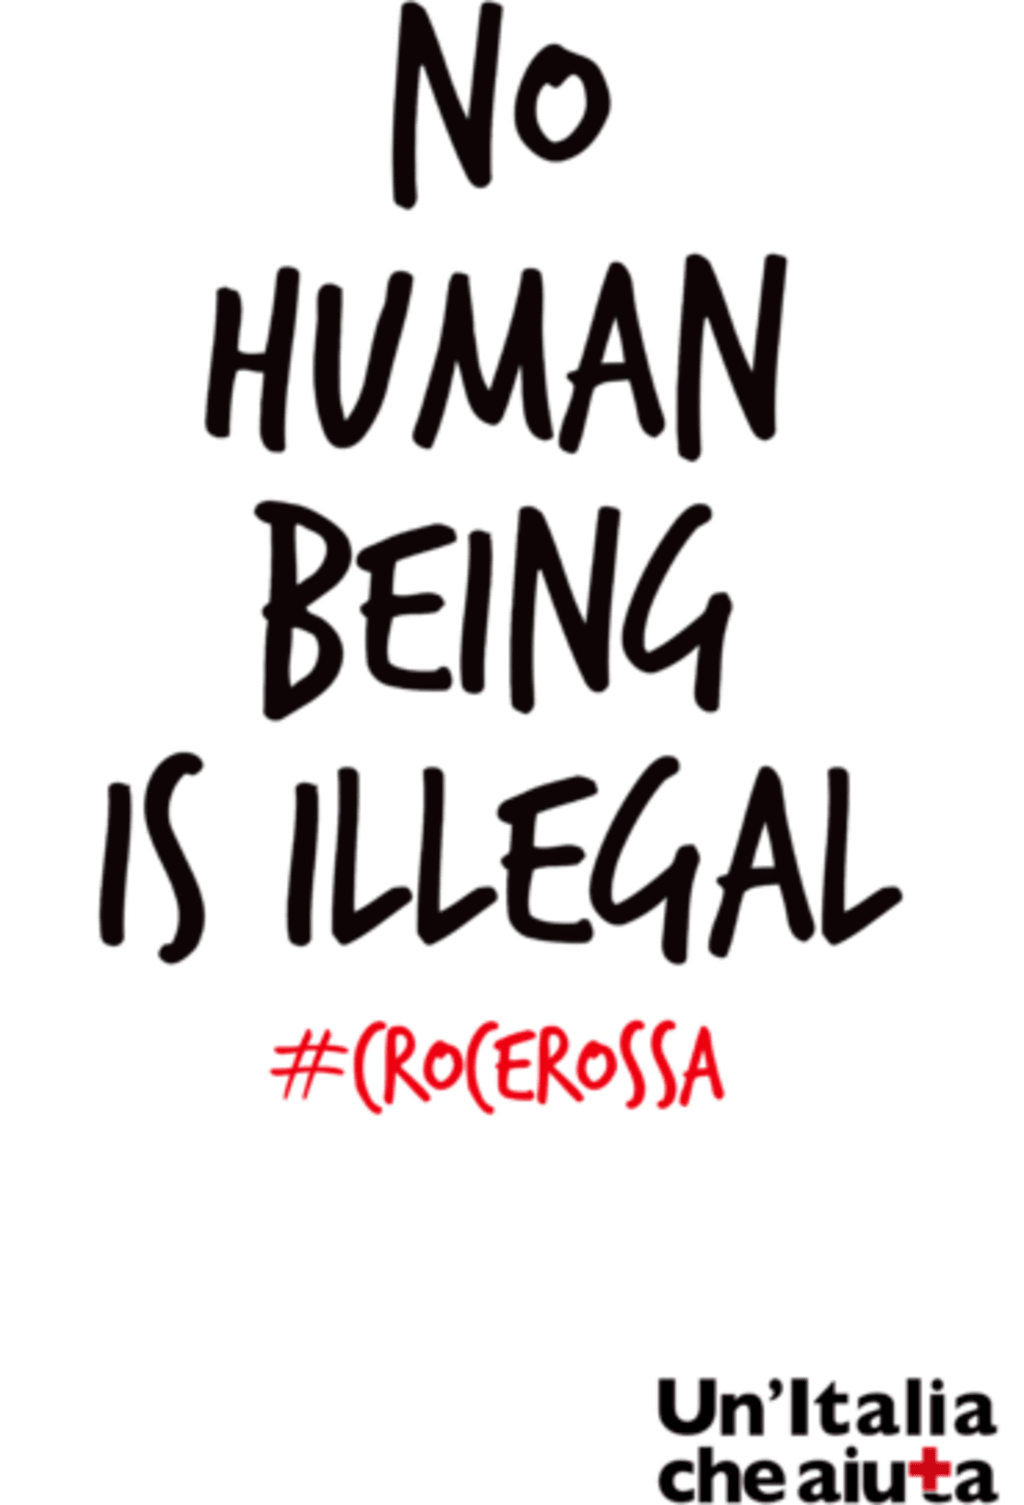 "No Human Being is Illegal"